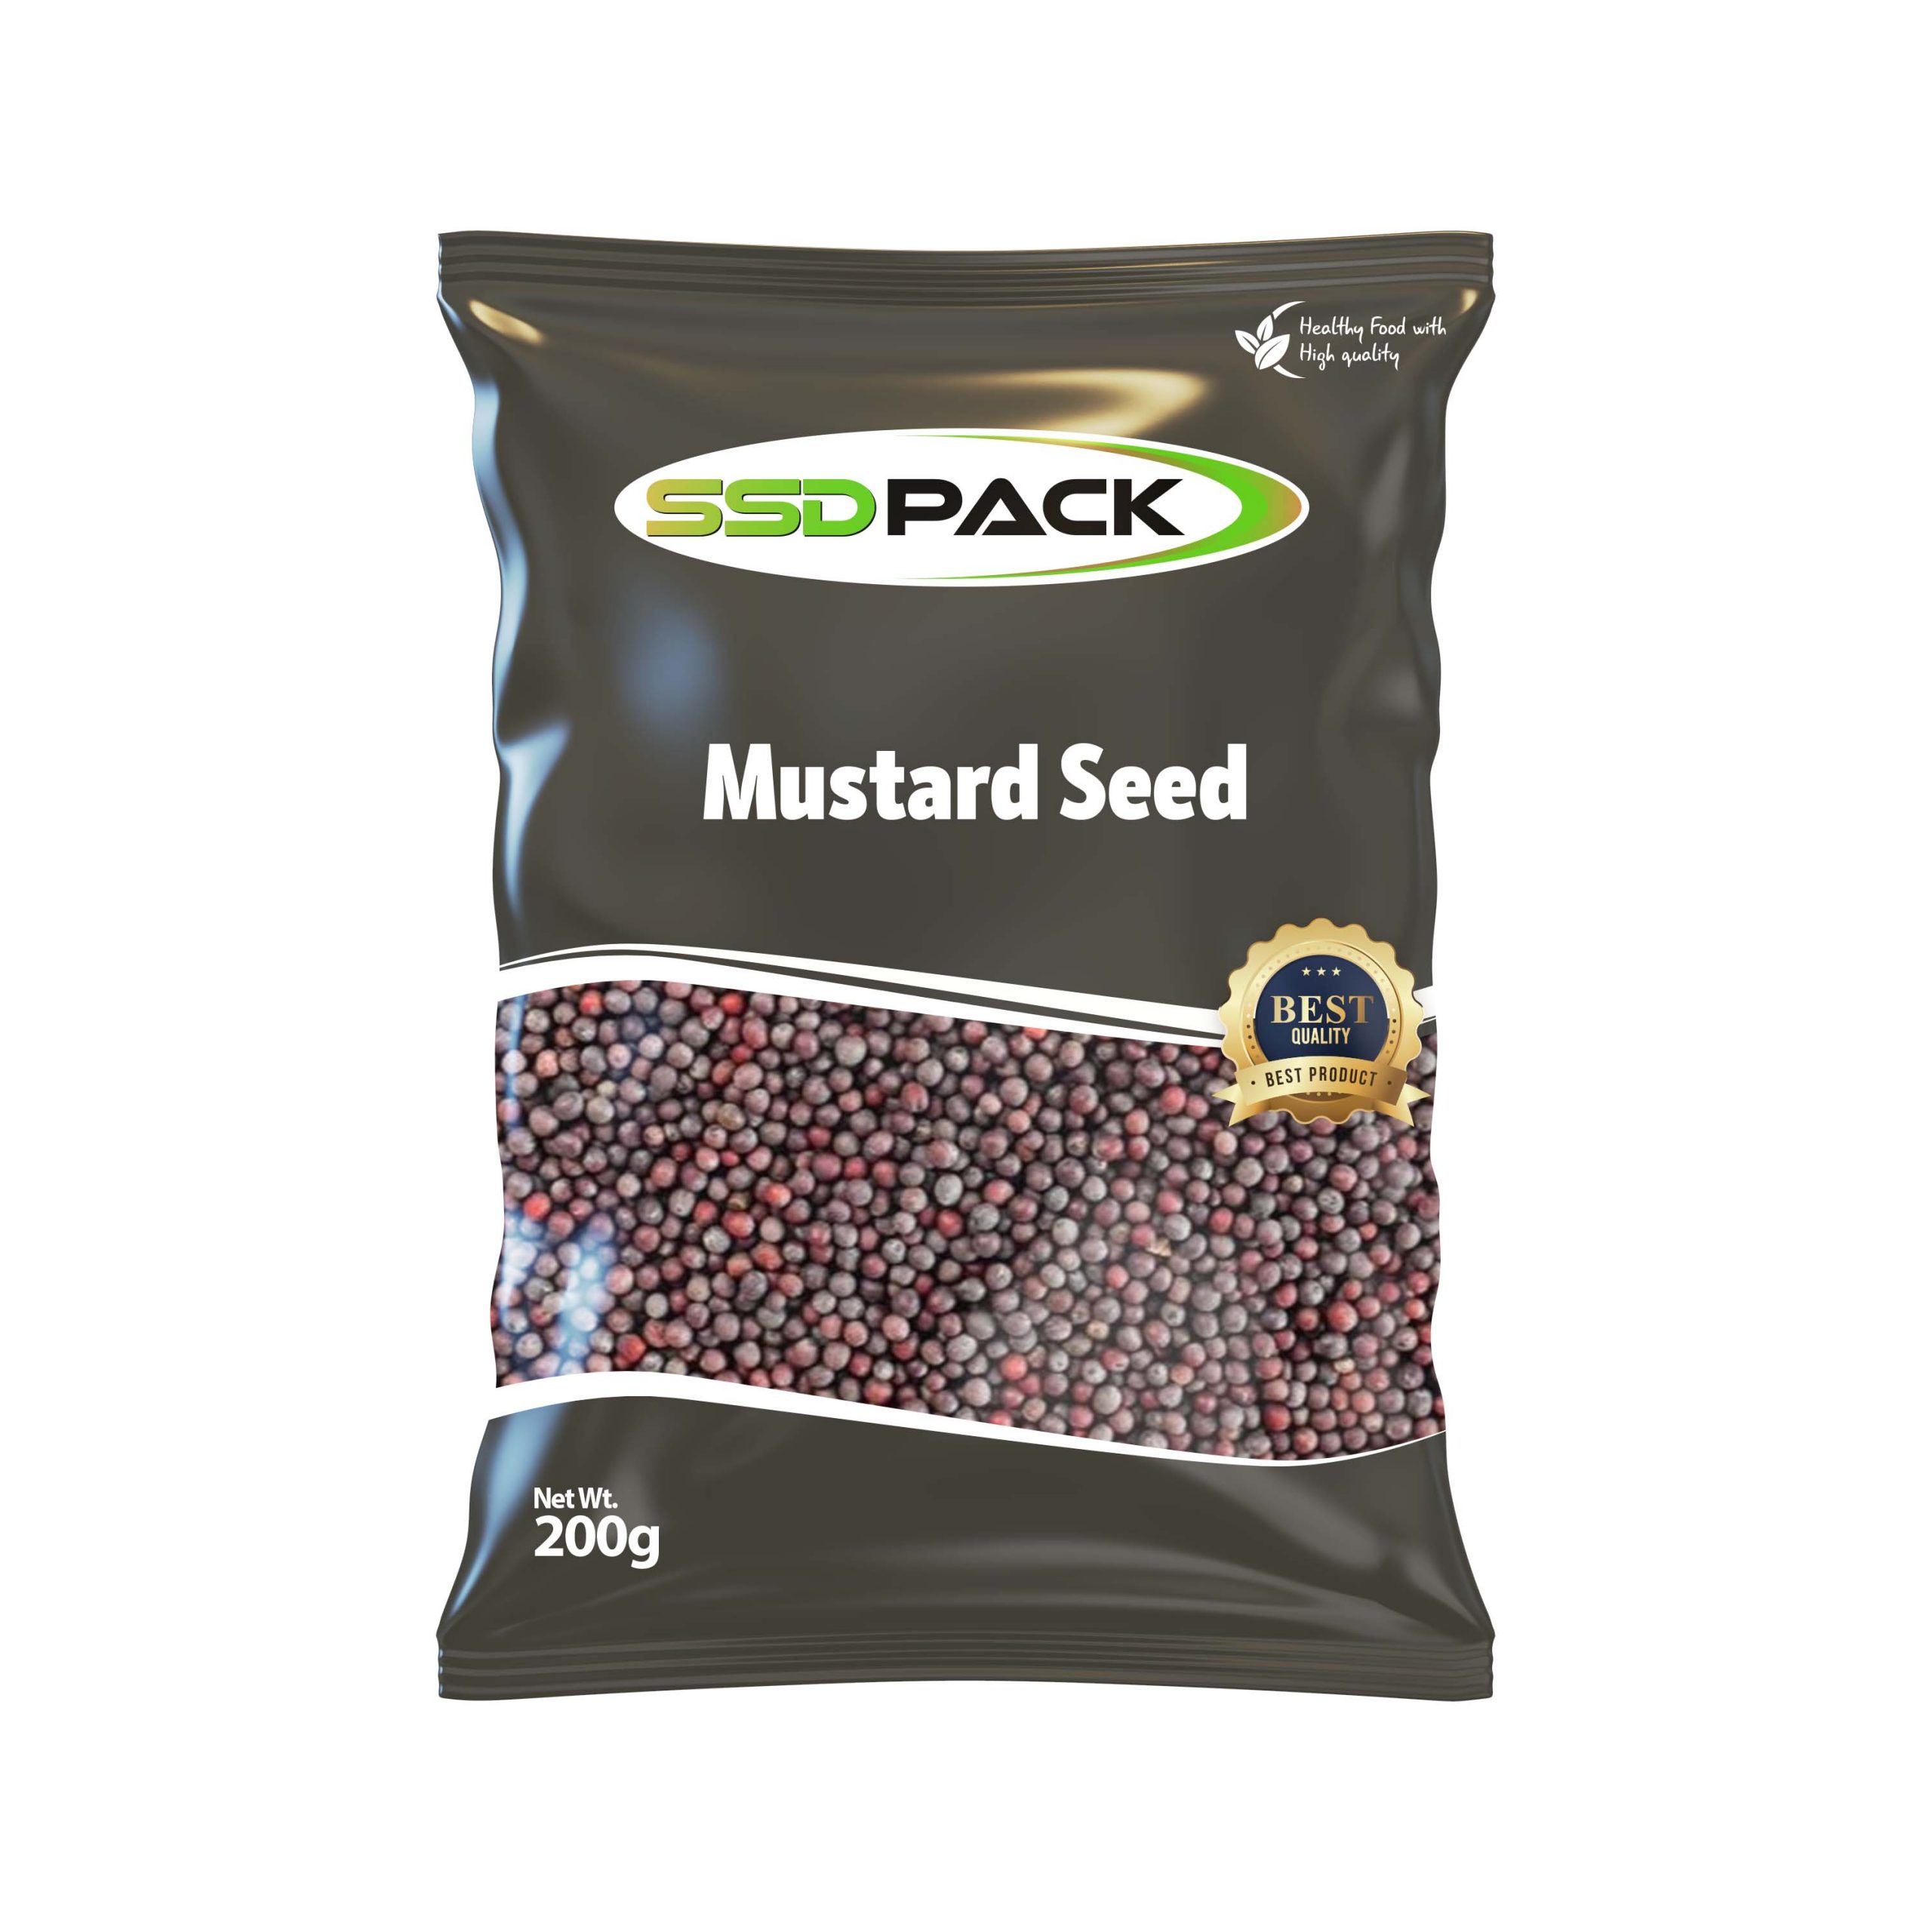 Mustrad Seed scaled